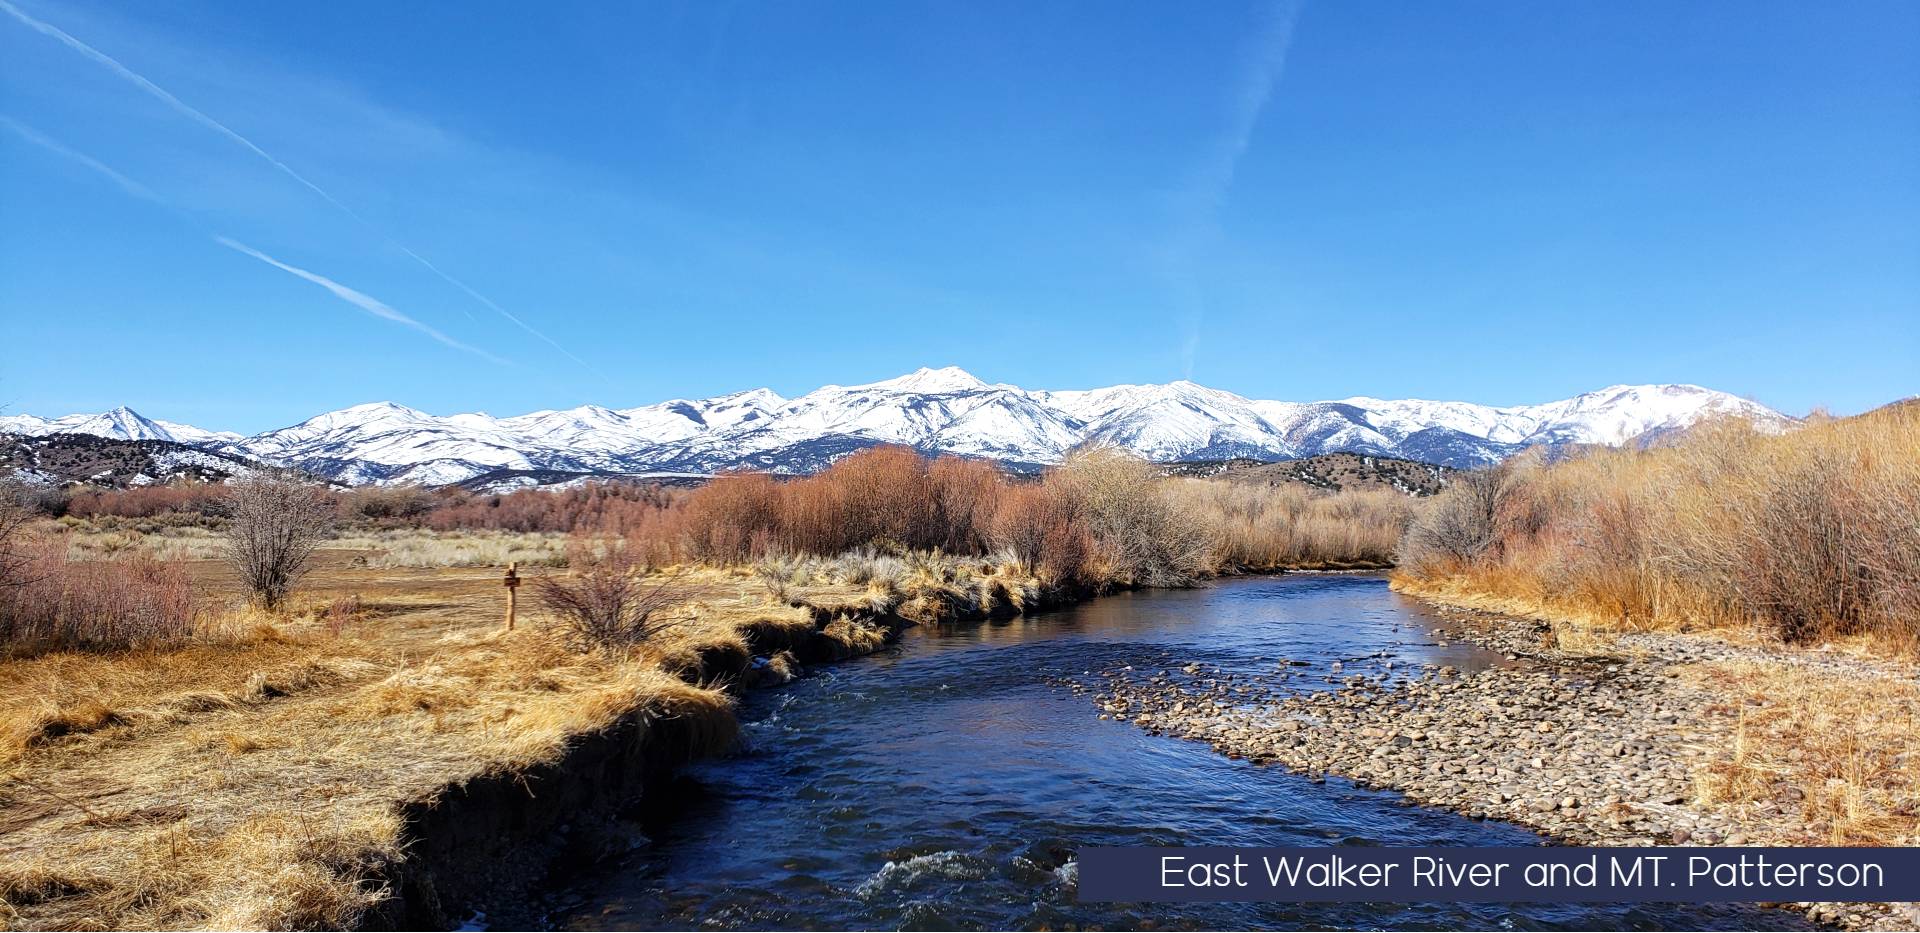 East Walker river with snow capped mountains